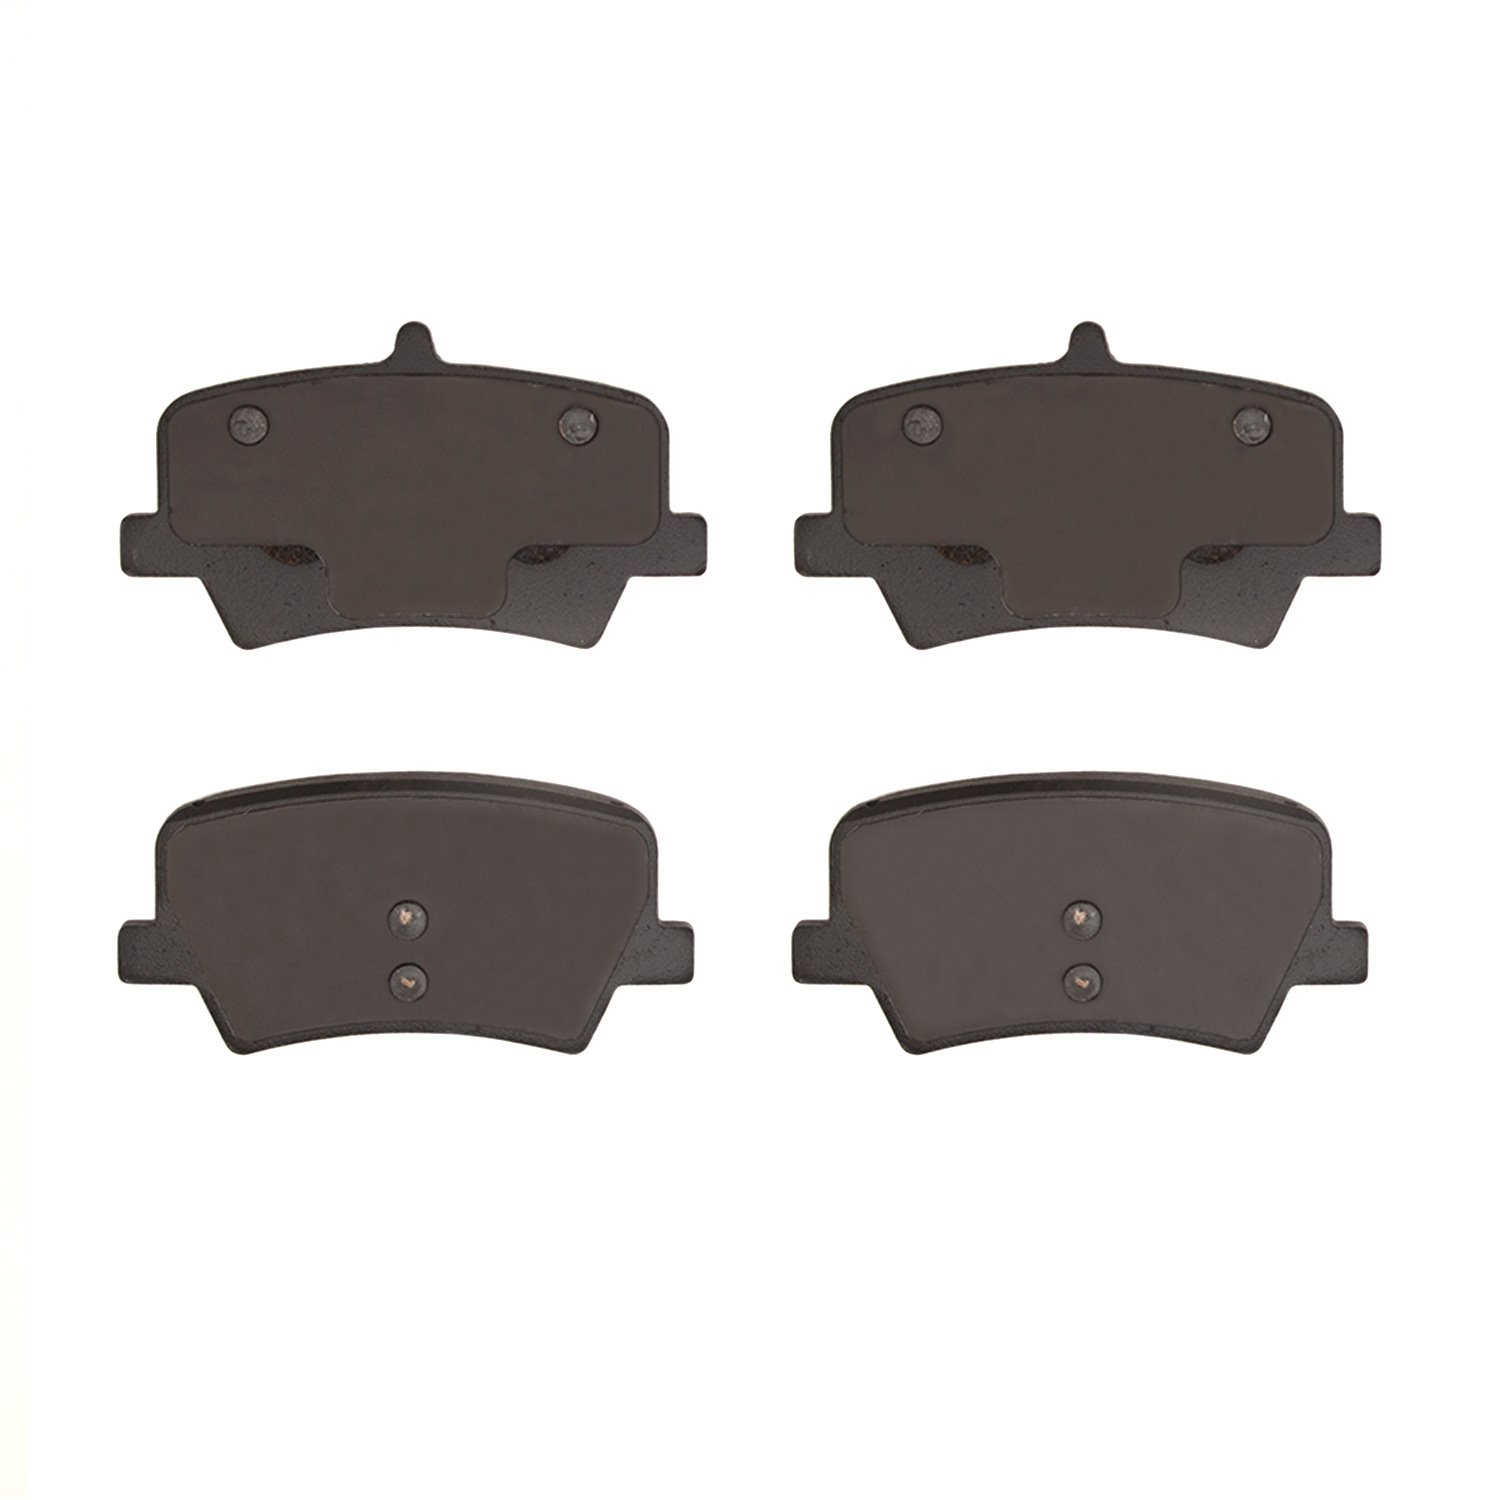 1600-2136-00 5000 Euro Ceramic Brake Pads, Fits Select Volvo, Position: Rear